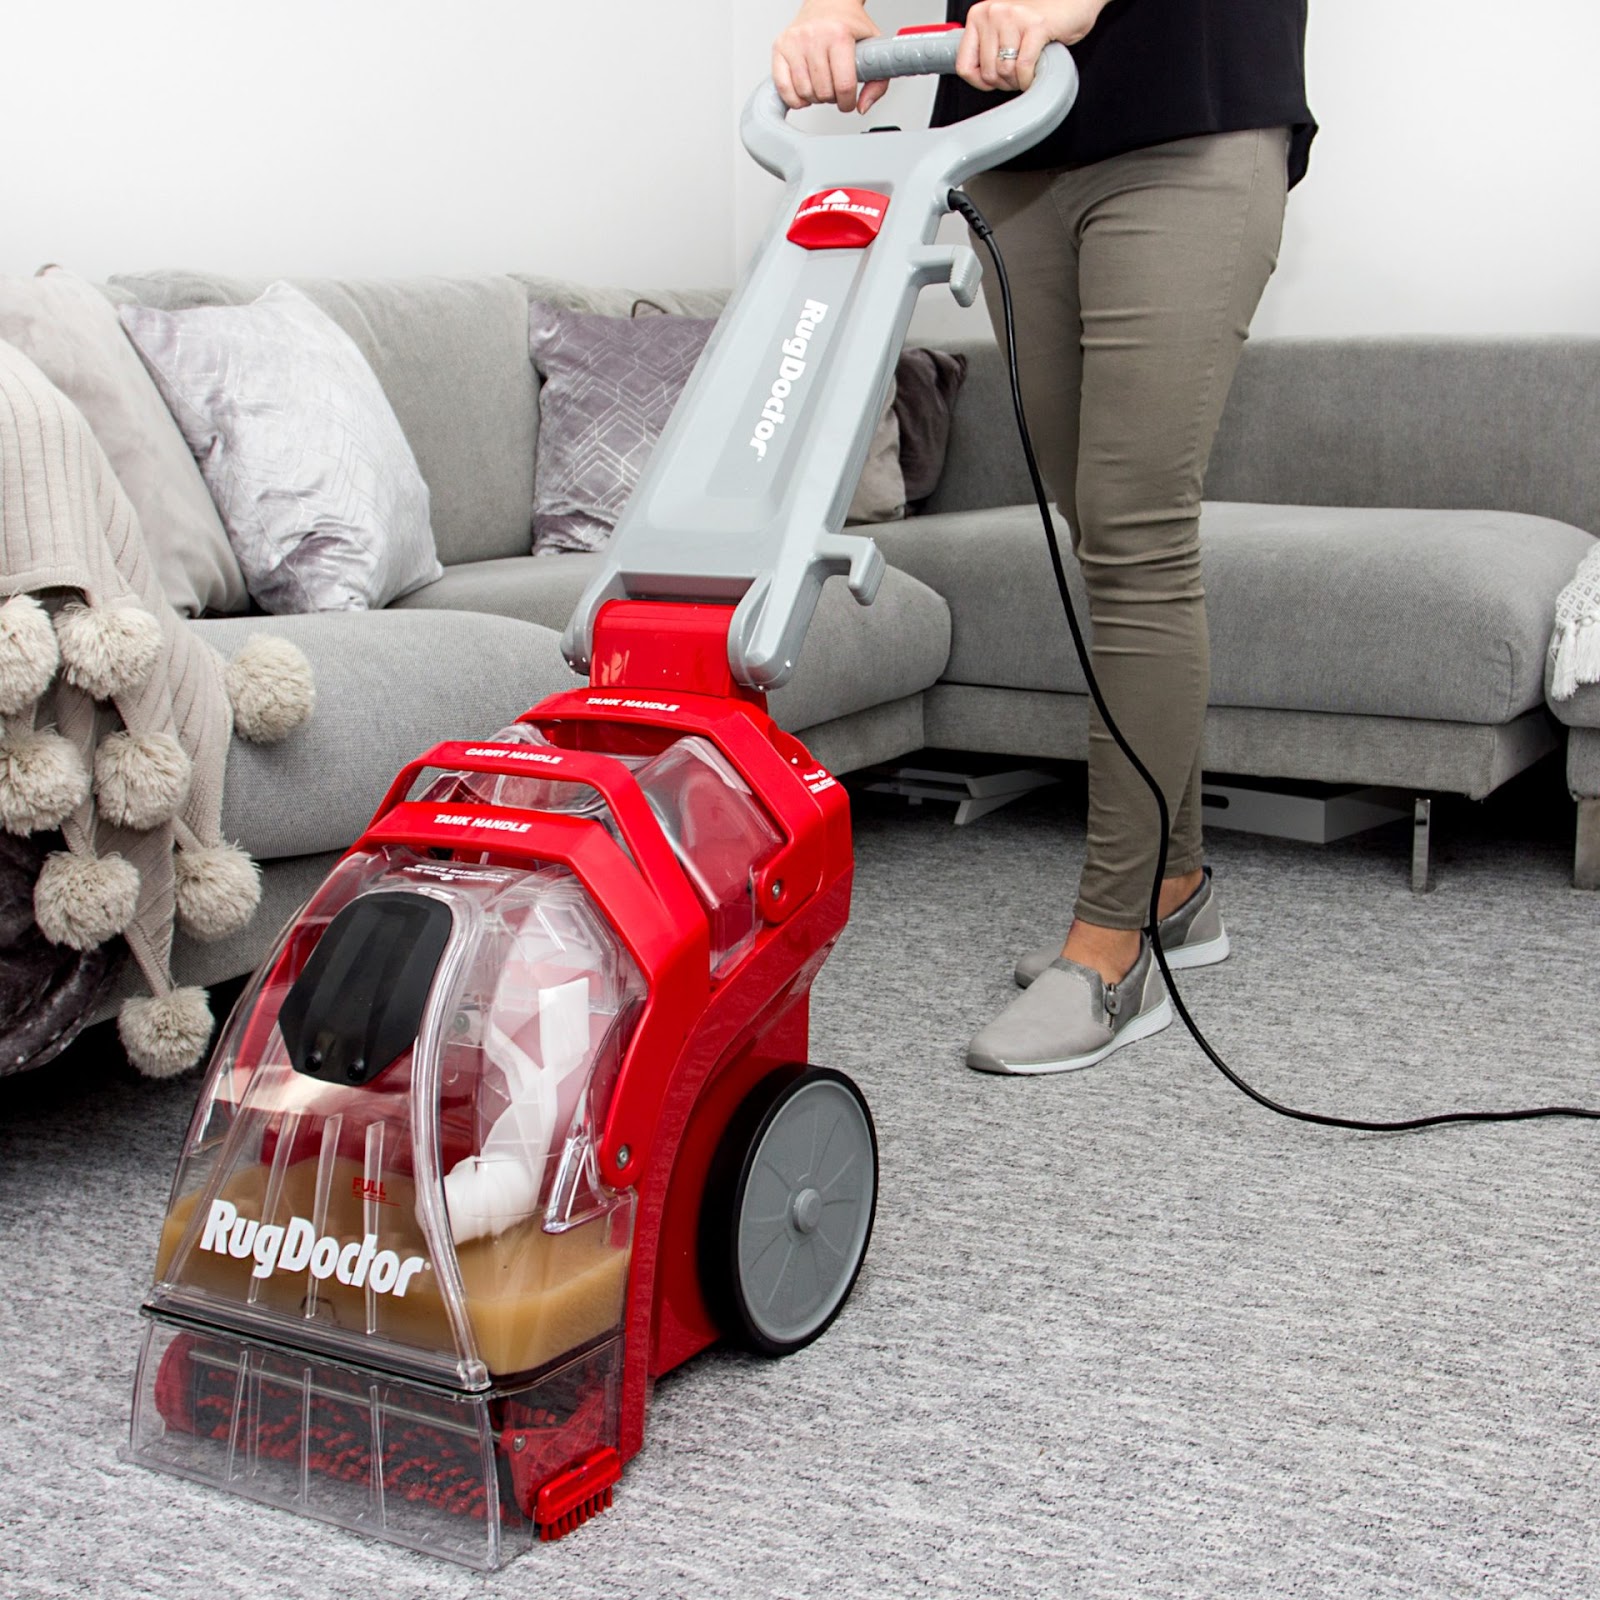 Carpet Cleaner: Overview